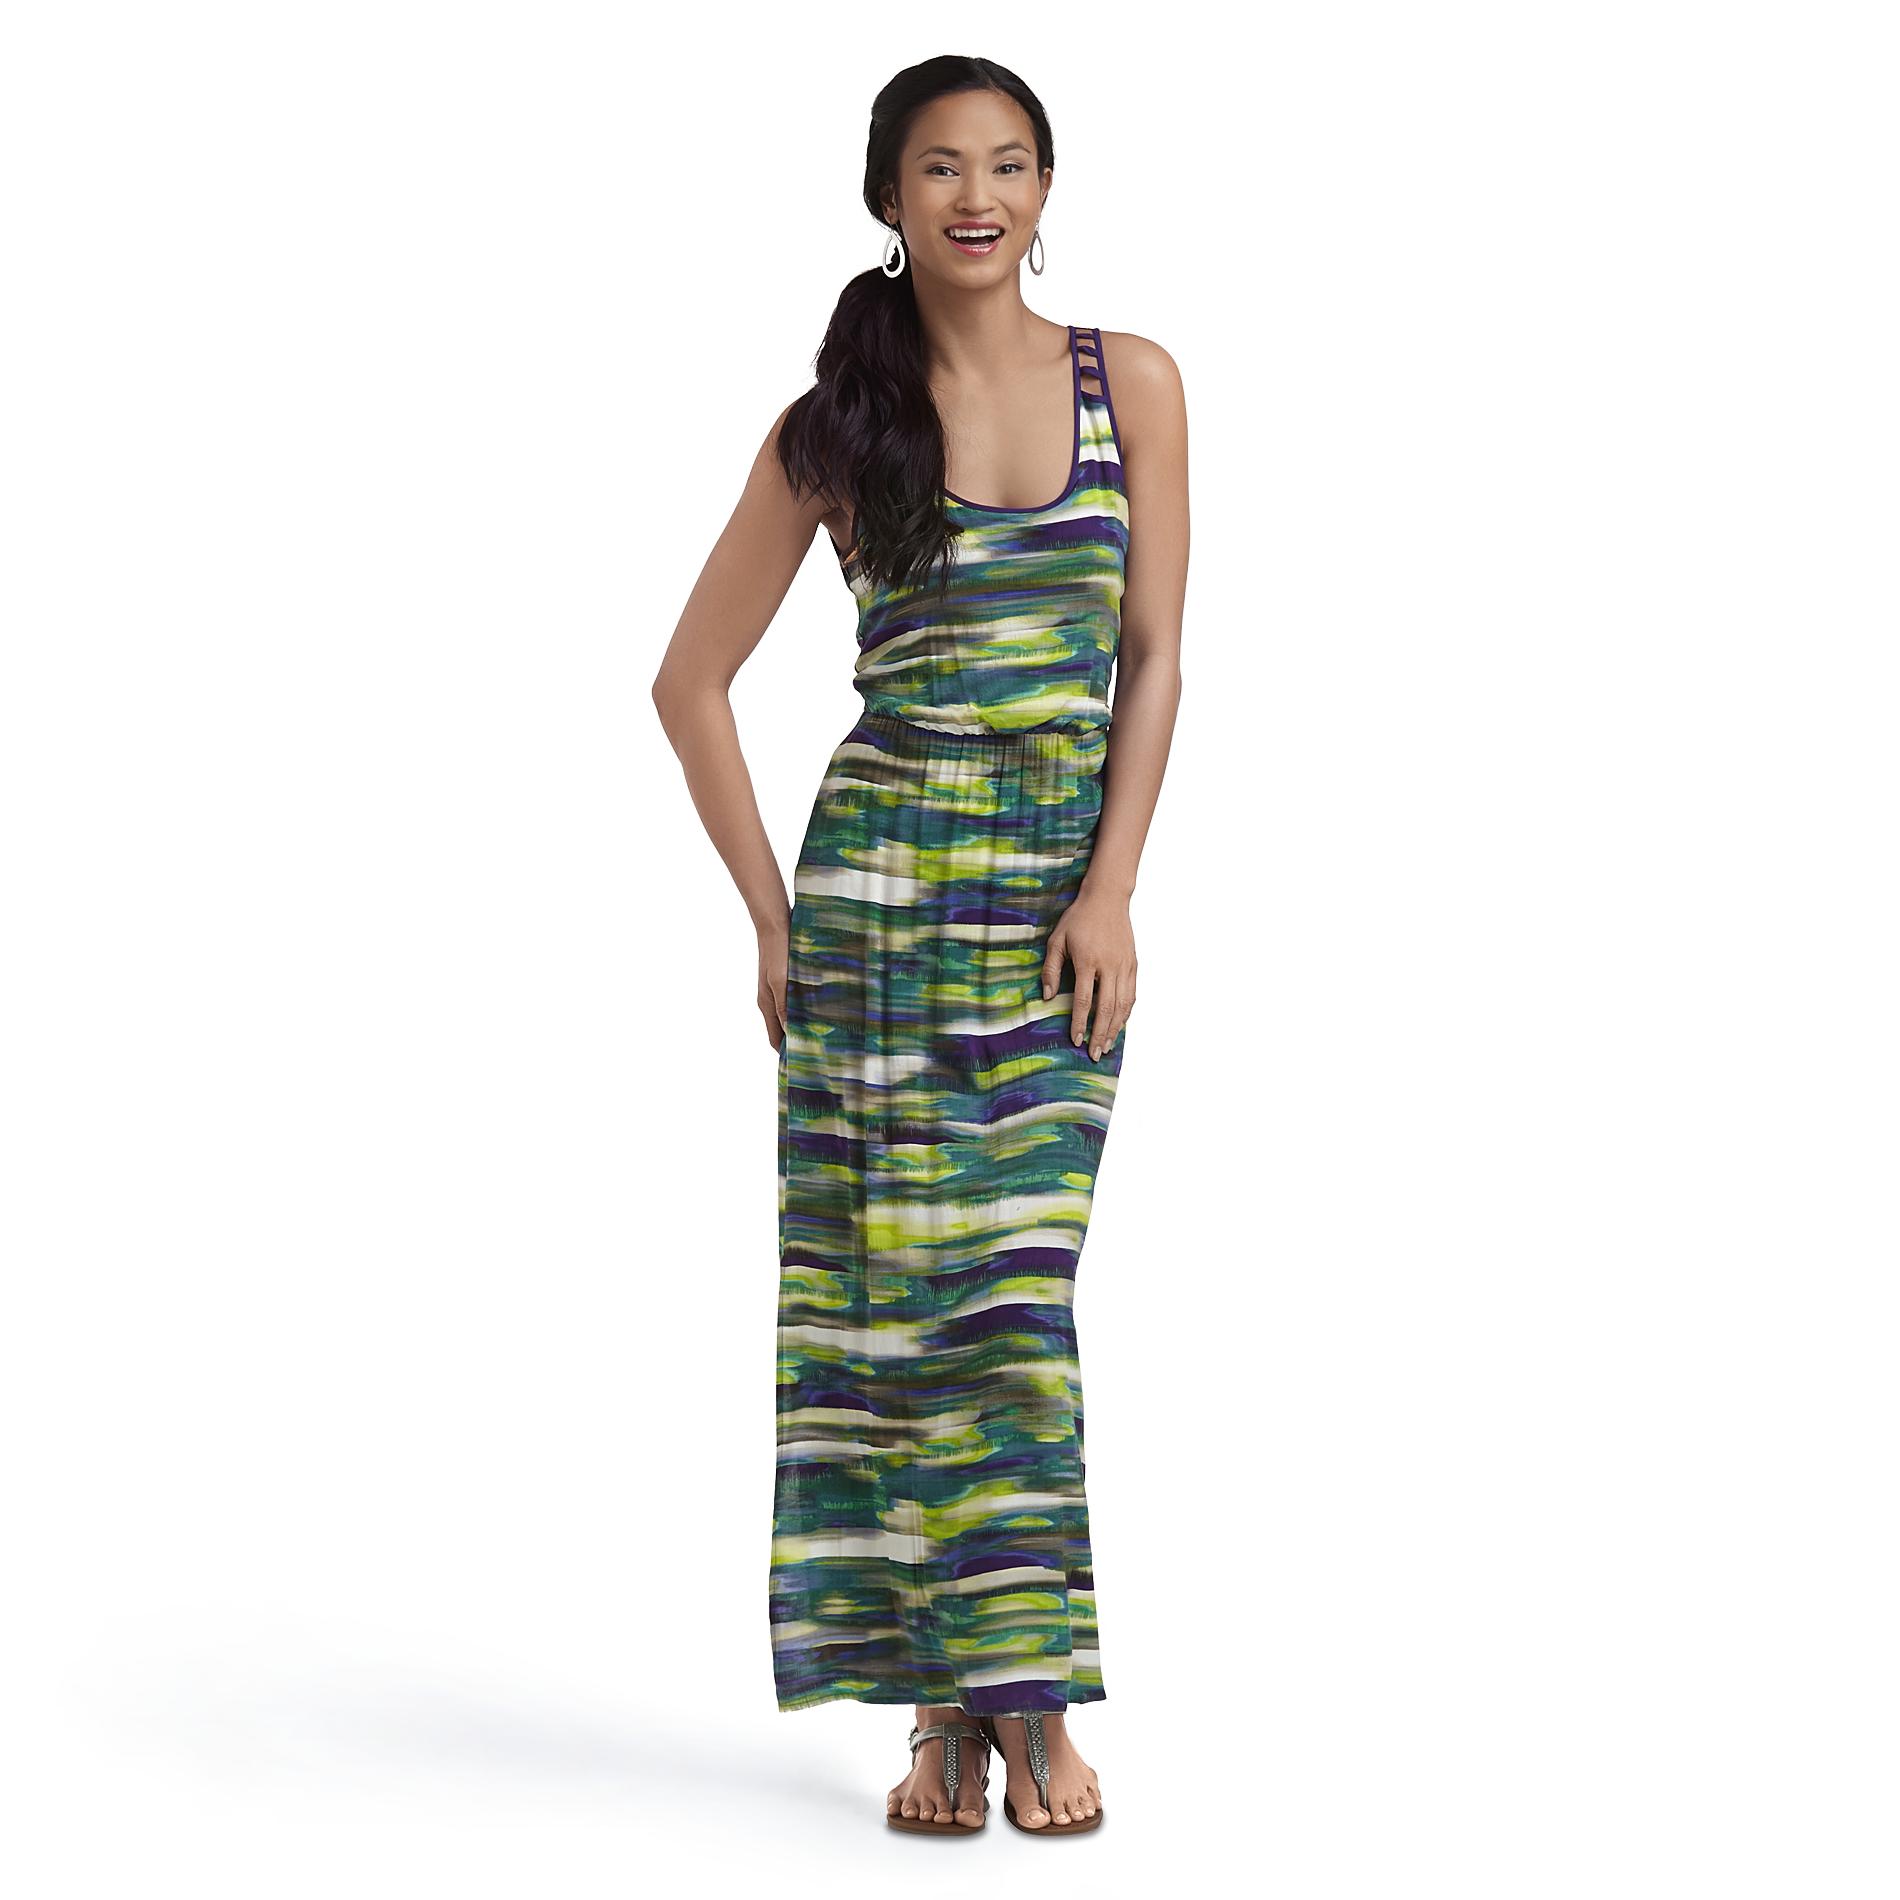 Attention Women's Strappy Maxi Dress - Abstract Stripes Online Exclusive